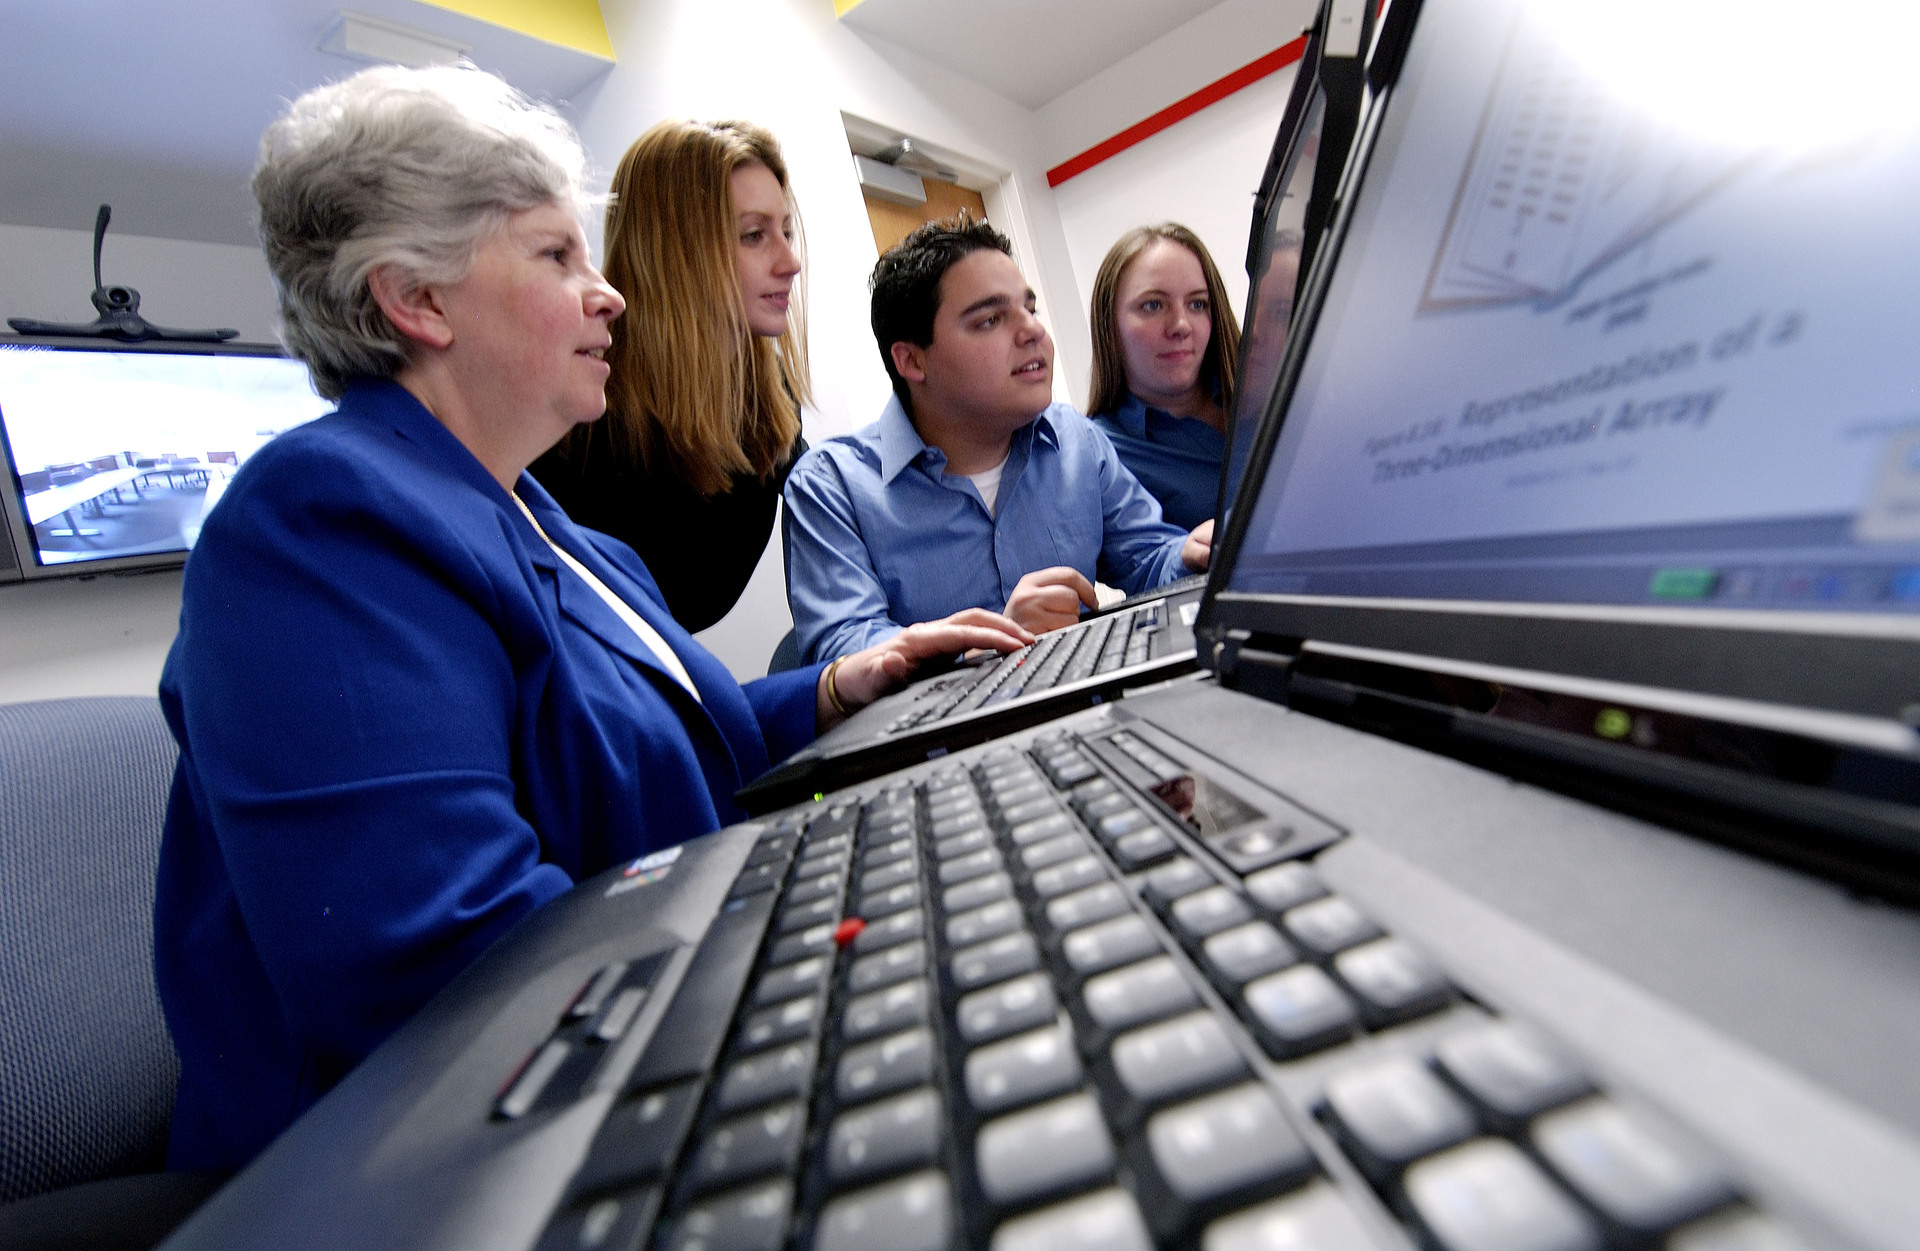 S. Jane Fritz in a computer lab with students.